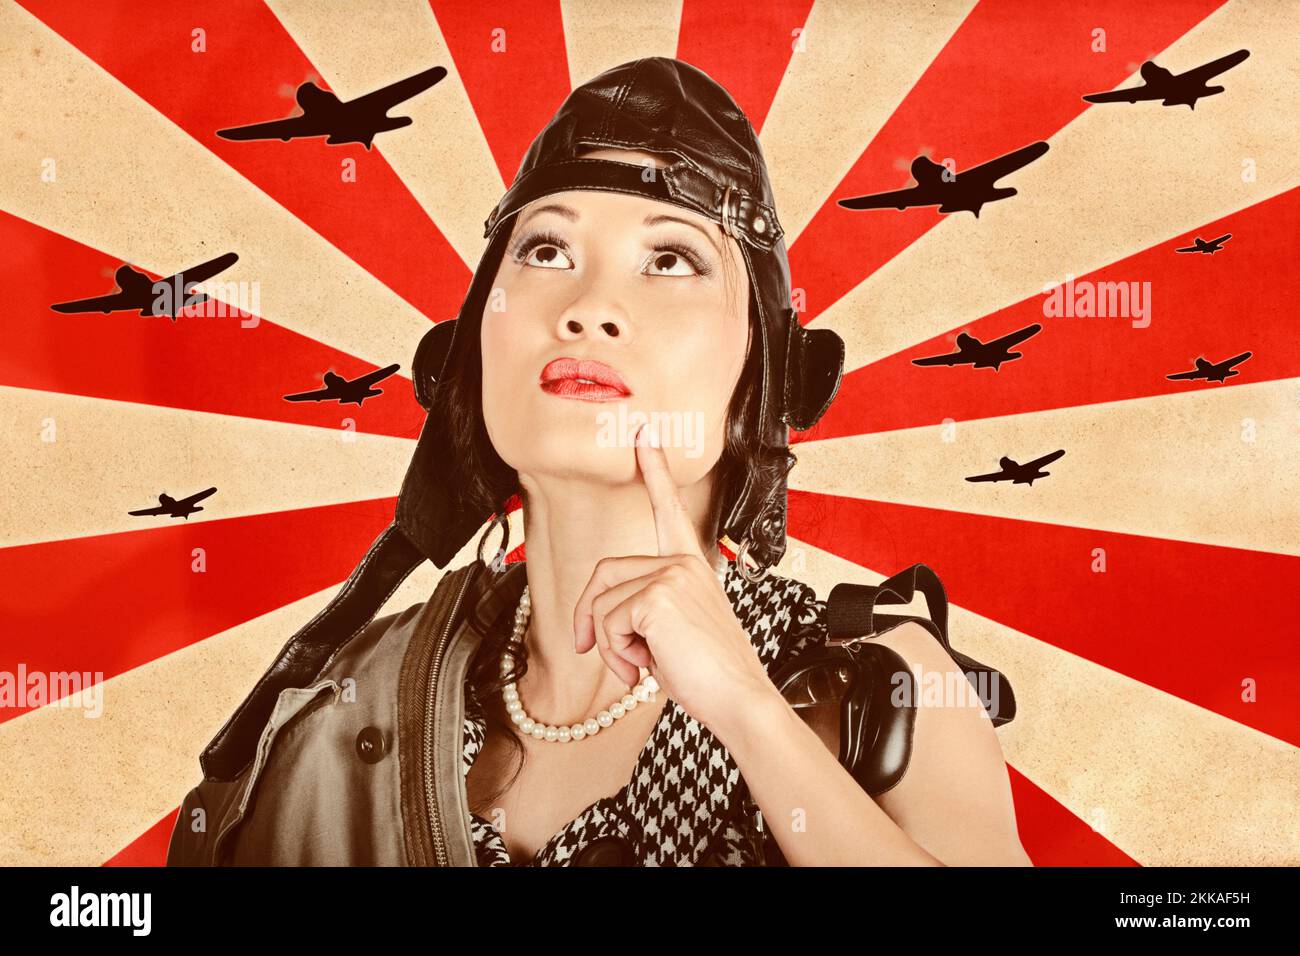 Retro propaganda take-off. Asian pinup freedom fighter looking up to the skies of revolution to scout the war planes of liberation Stock Photo